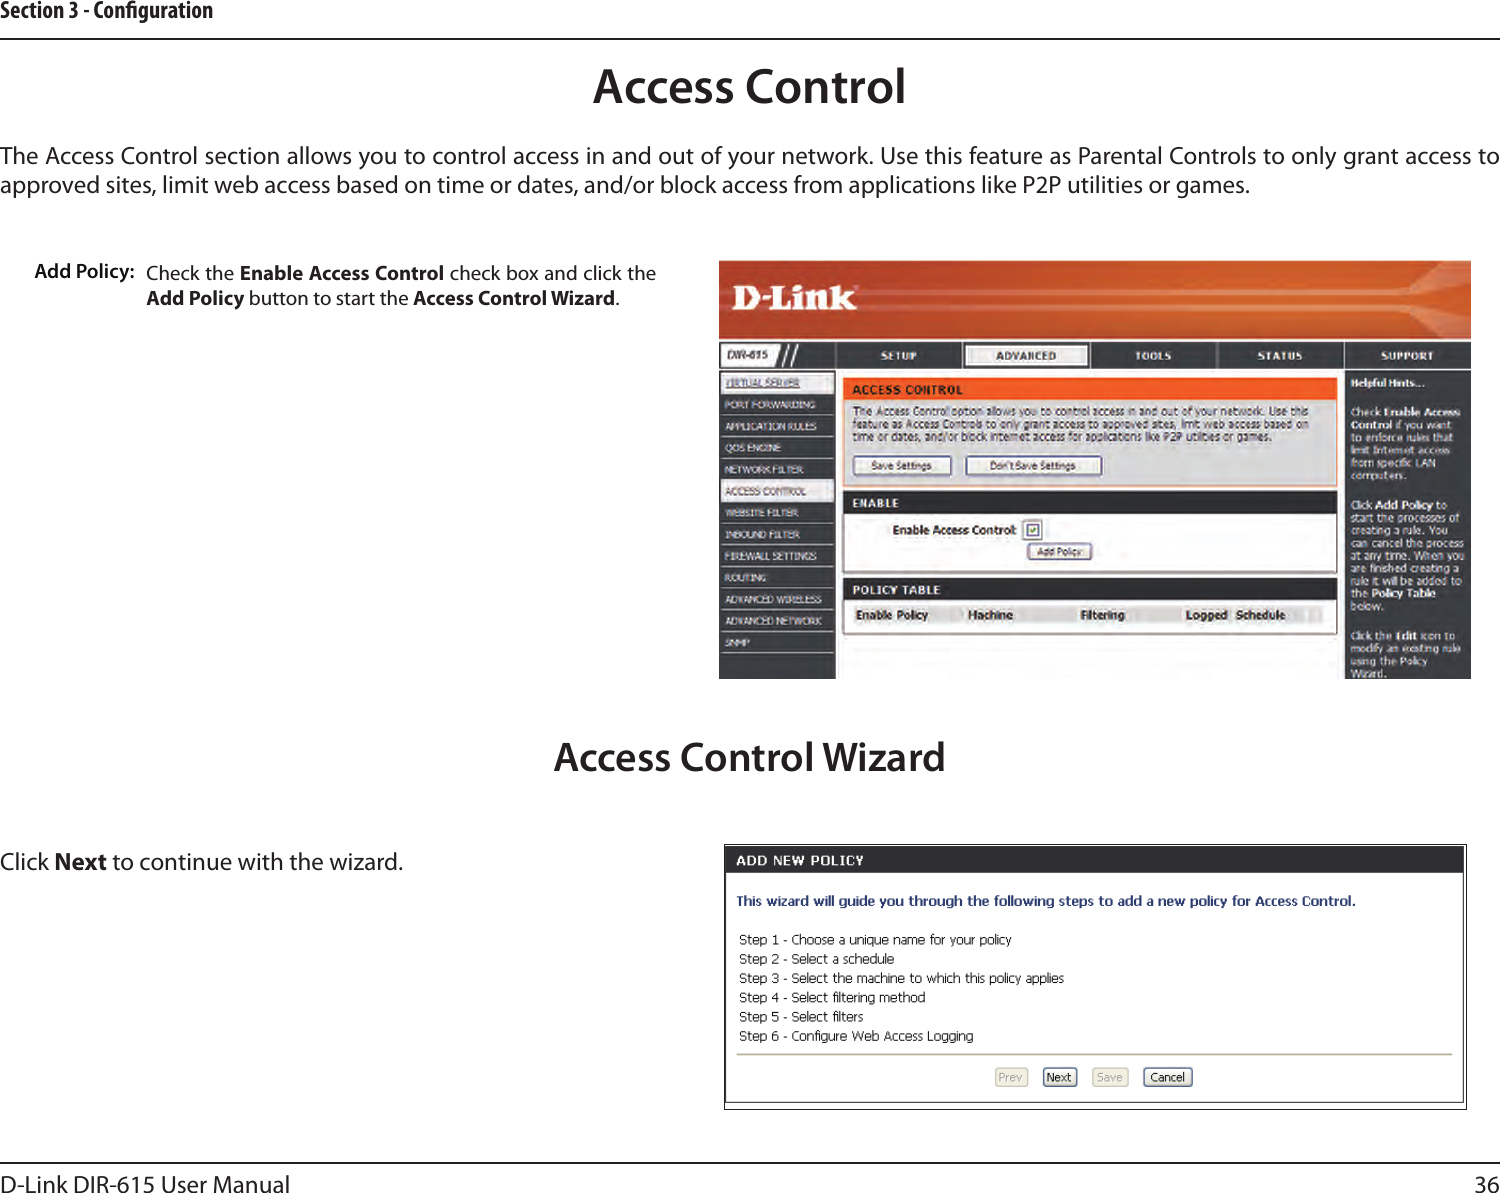 36D-Link DIR-615 User ManualSection 3 - CongurationAccess ControlCheck the Enable Access Control check box and click the Add Policy button to start the Access Control Wizard. Add Policy:The Access Control section allows you to control access in and out of your network. Use this feature as Parental Controls to only grant access to approved sites, limit web access based on time or dates, and/or block access from applications like P2P utilities or games.Click Next to continue with the wizard.Access Control Wizard